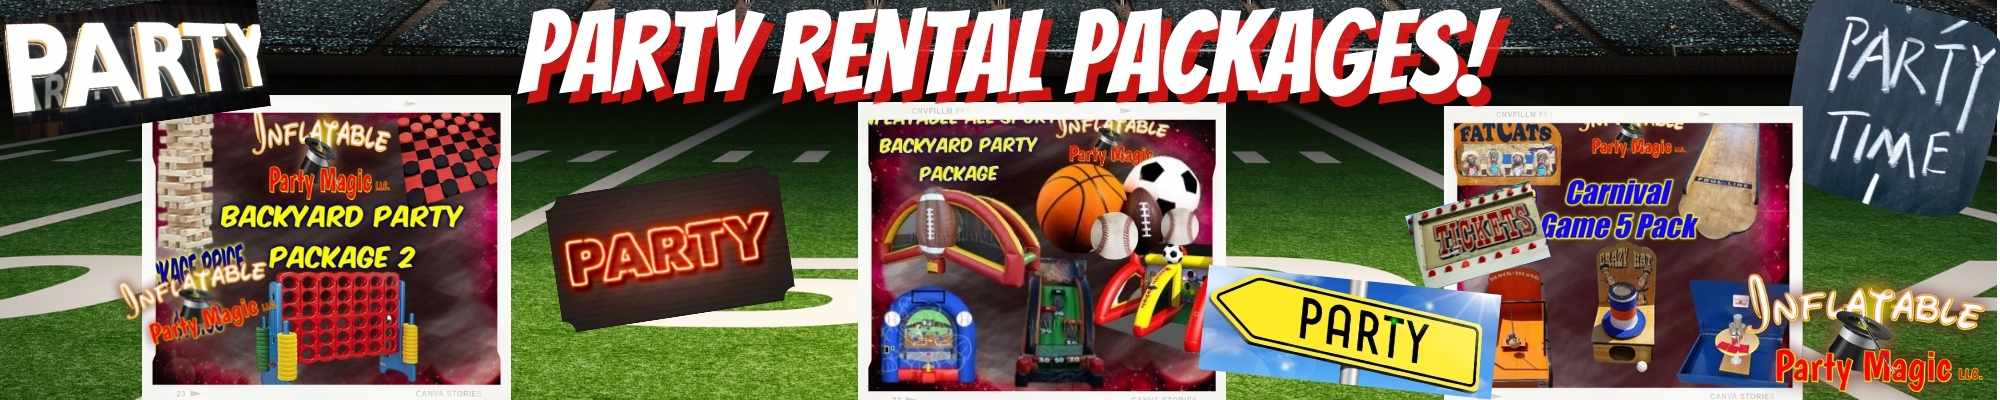 Party Rental Packages